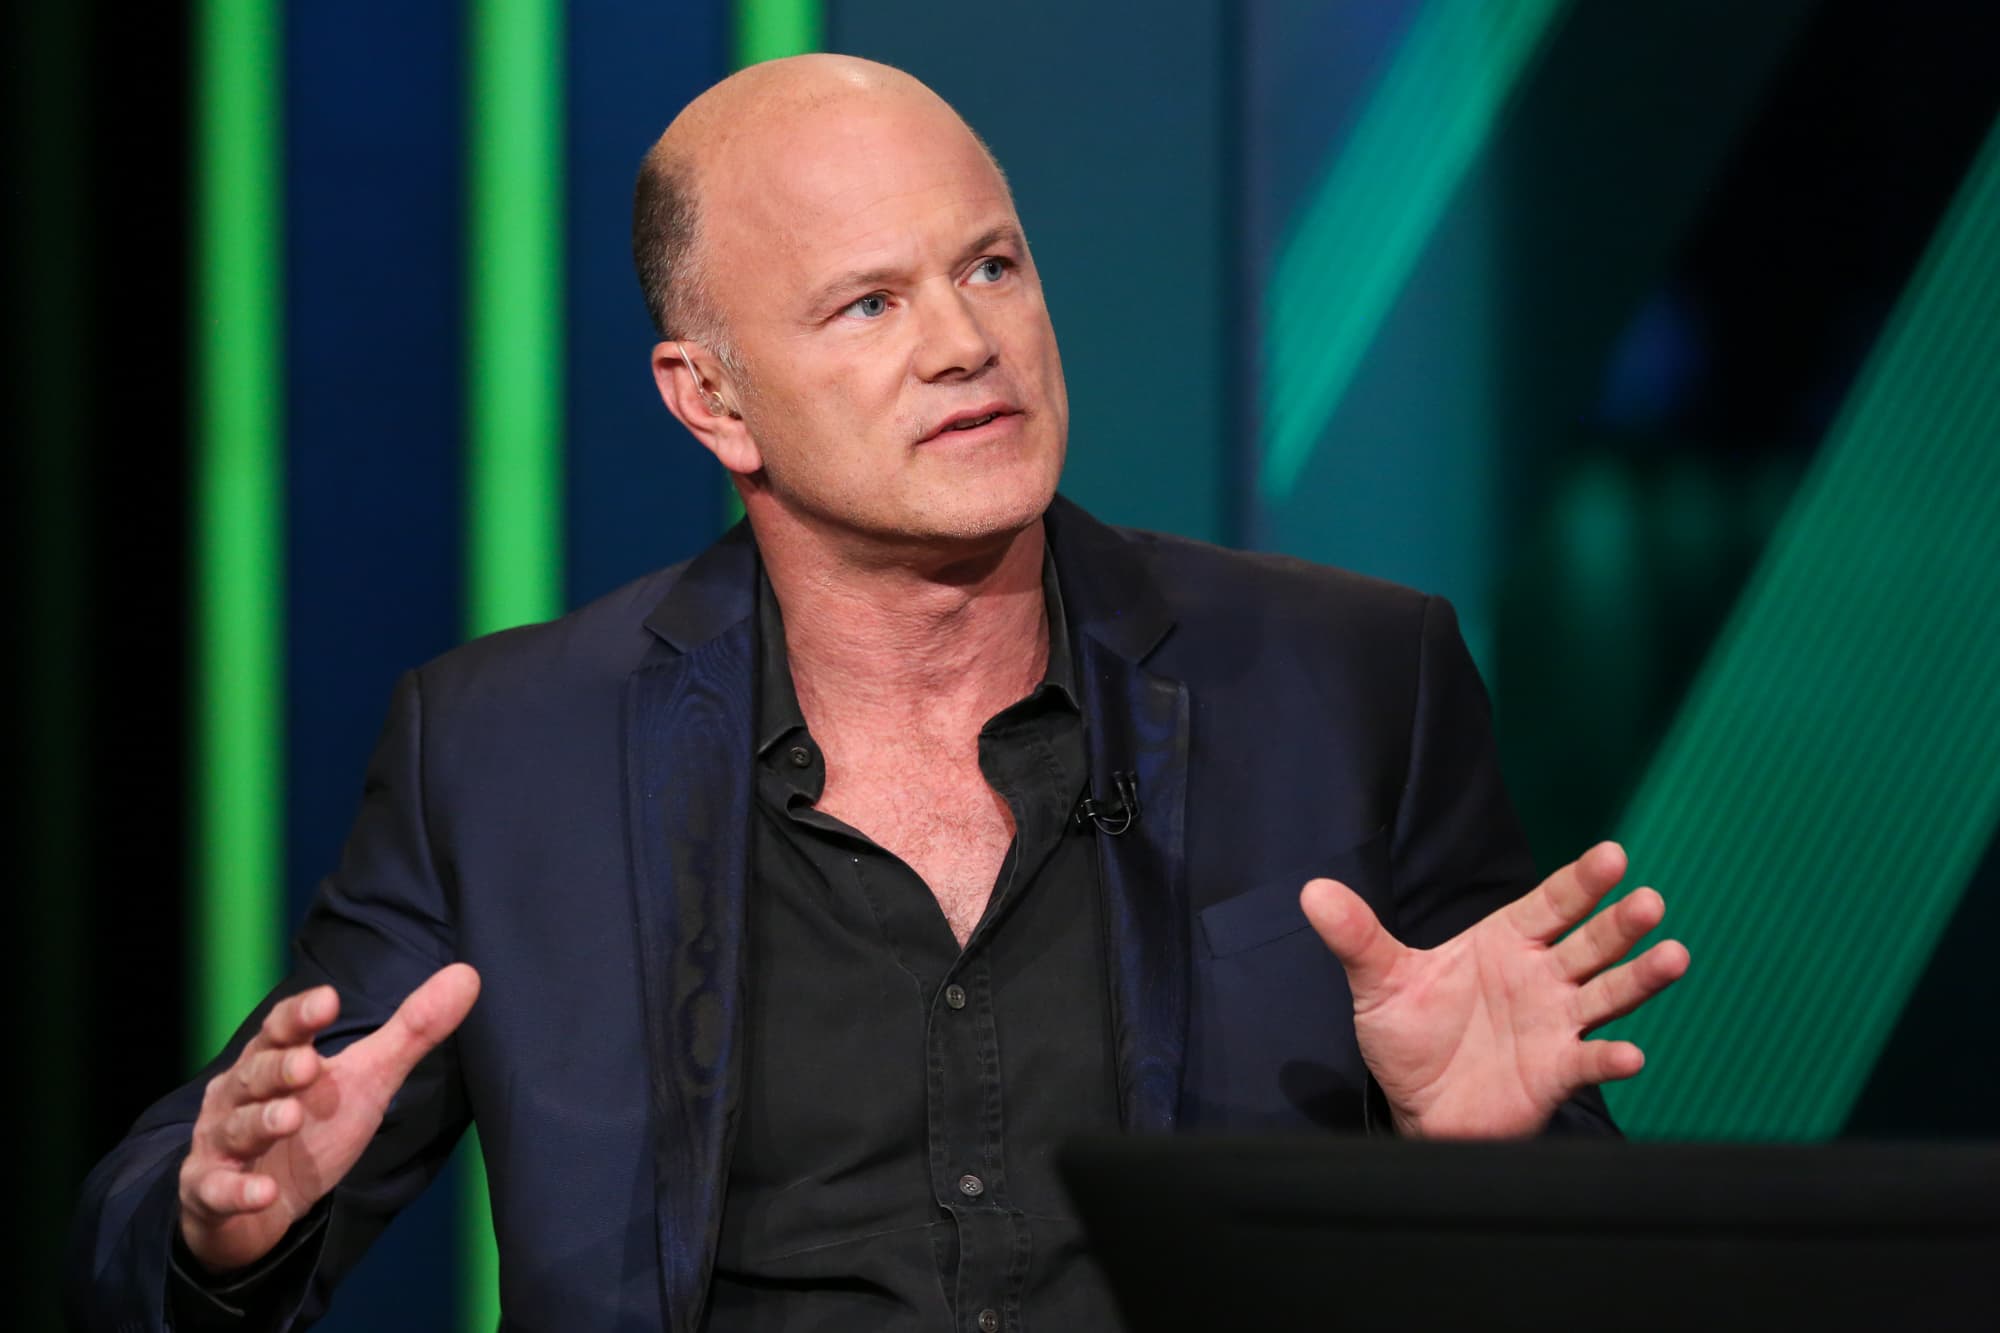 The sets in dogecoins and bitcoins are quite different, says Mike Novogratz